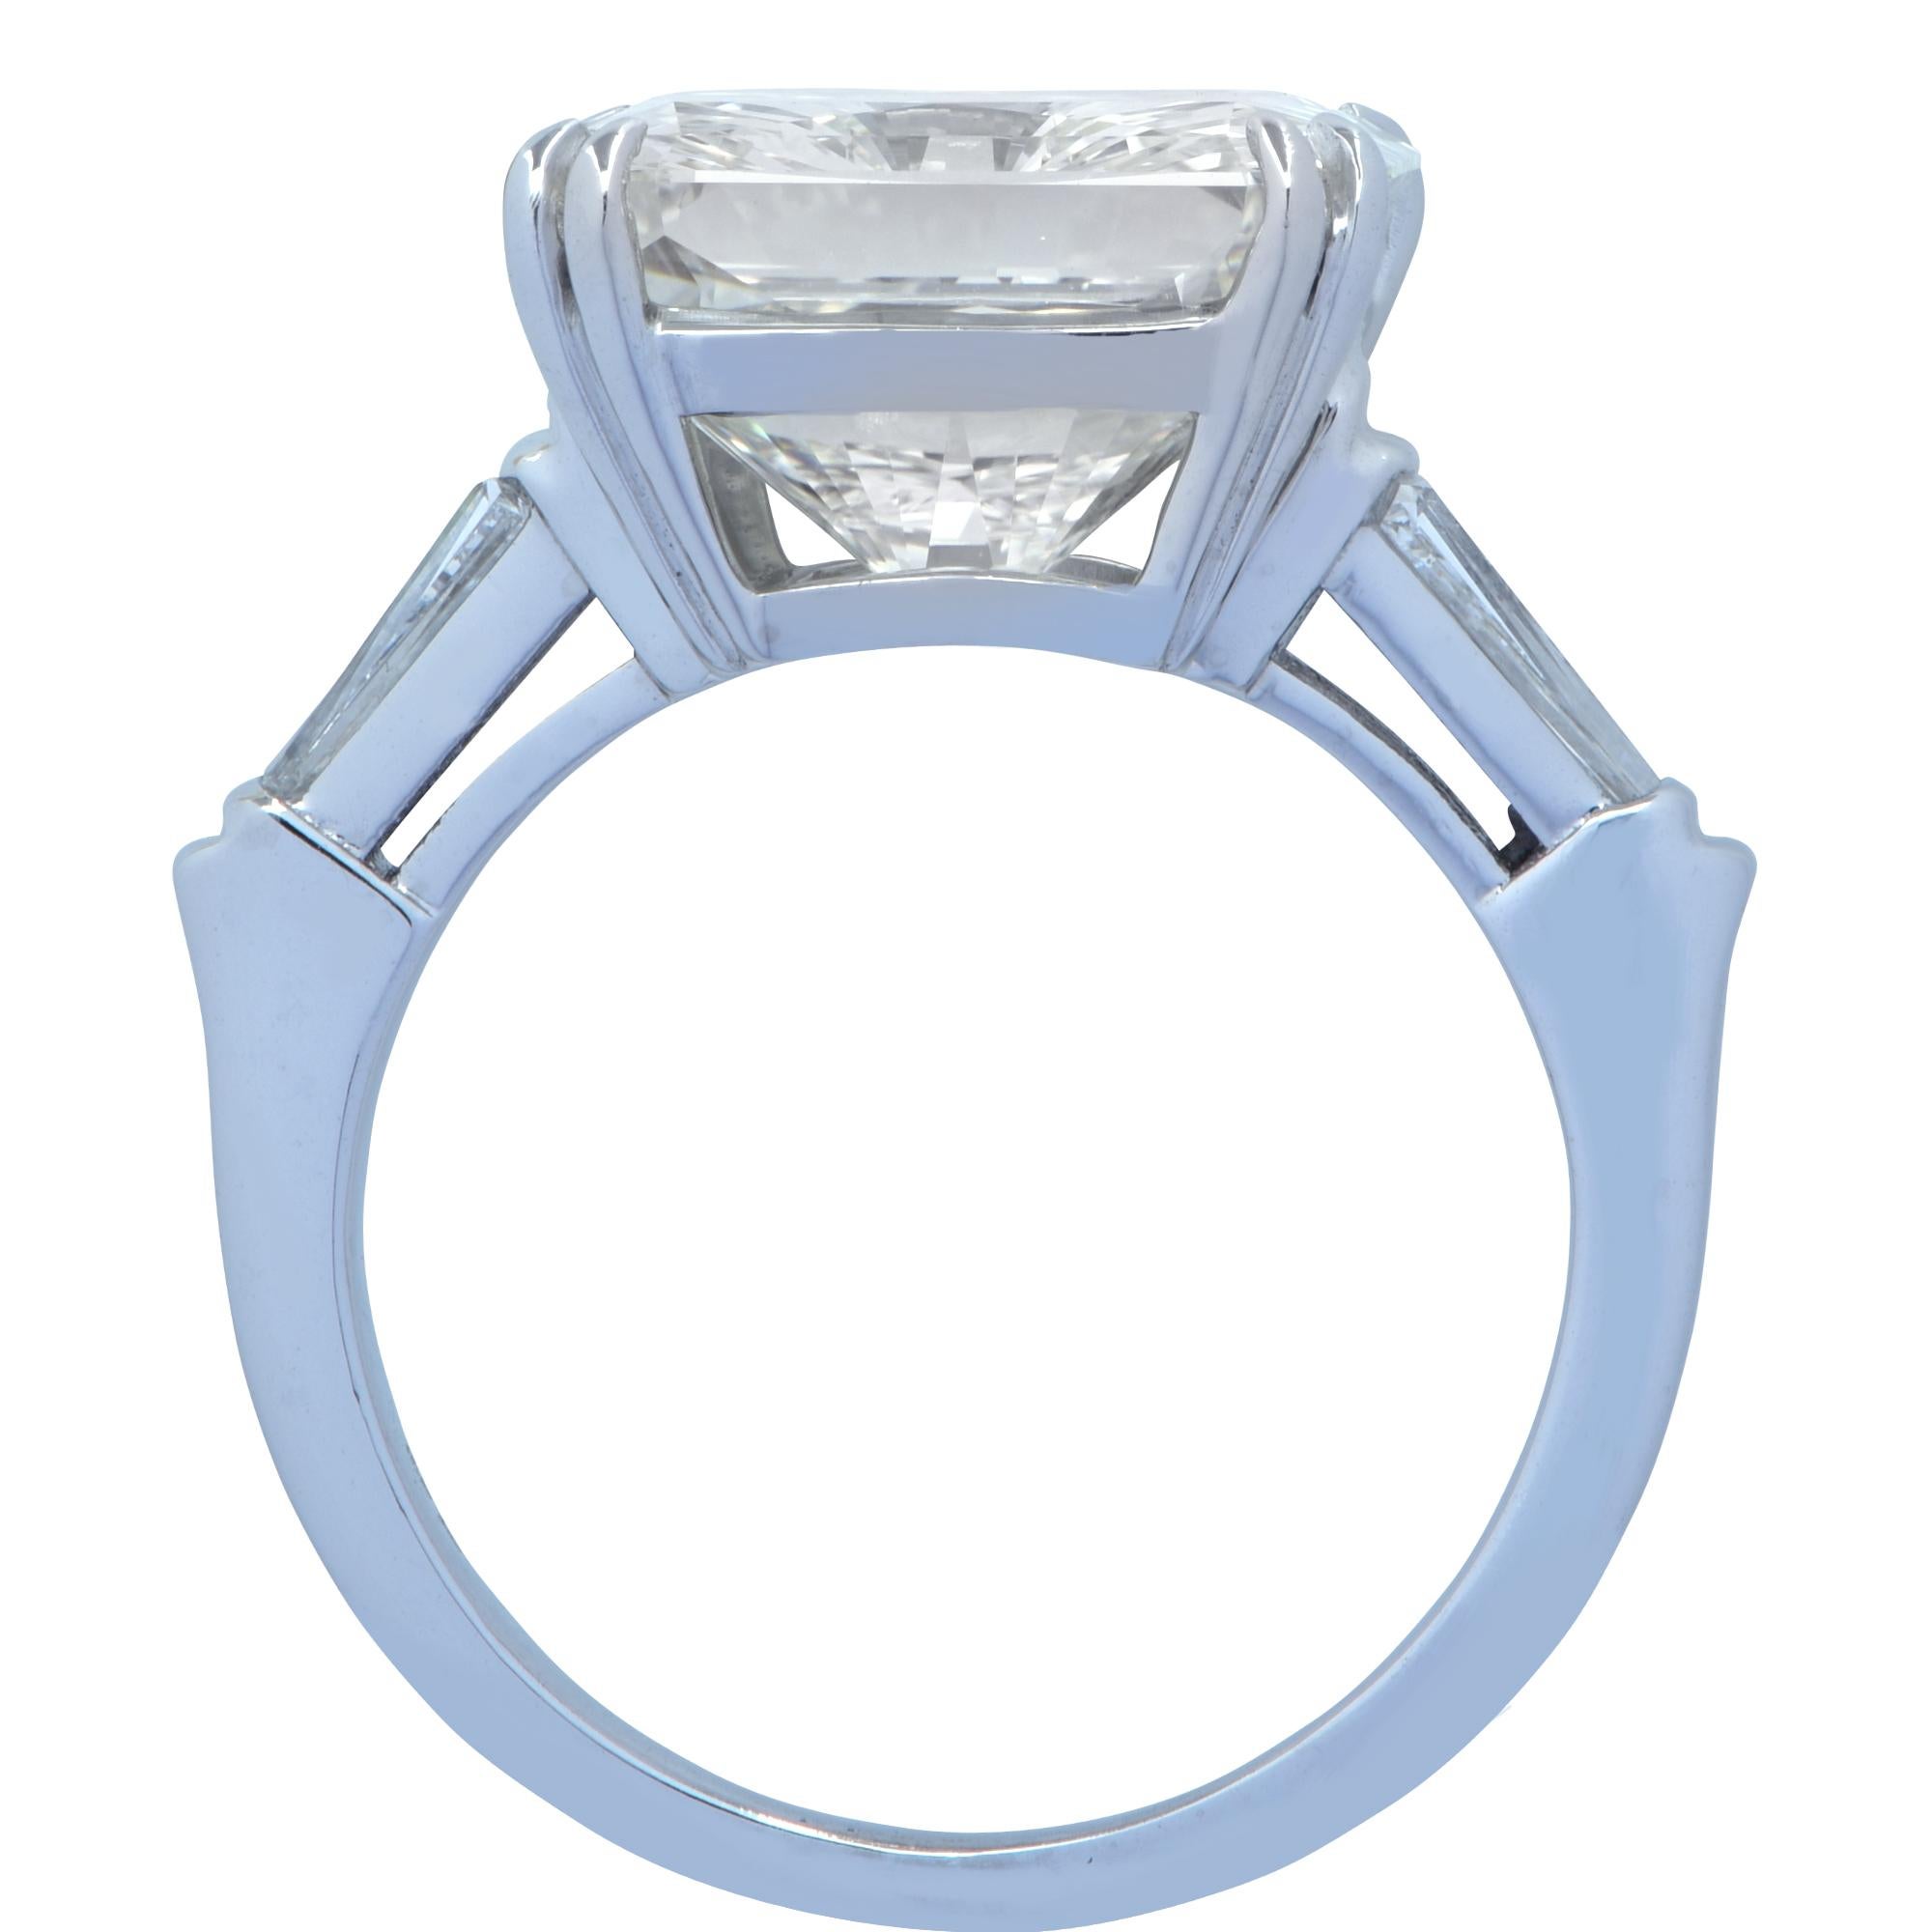 Breathtaking engagement ring crafted in platinum, showcasing a dazzling radiant cut diamond weighing an impressive 10.26 carats, L color and VS2 clarity, GIA Certified with very good polish and symmetry. The spectacular center stone is accented by 4